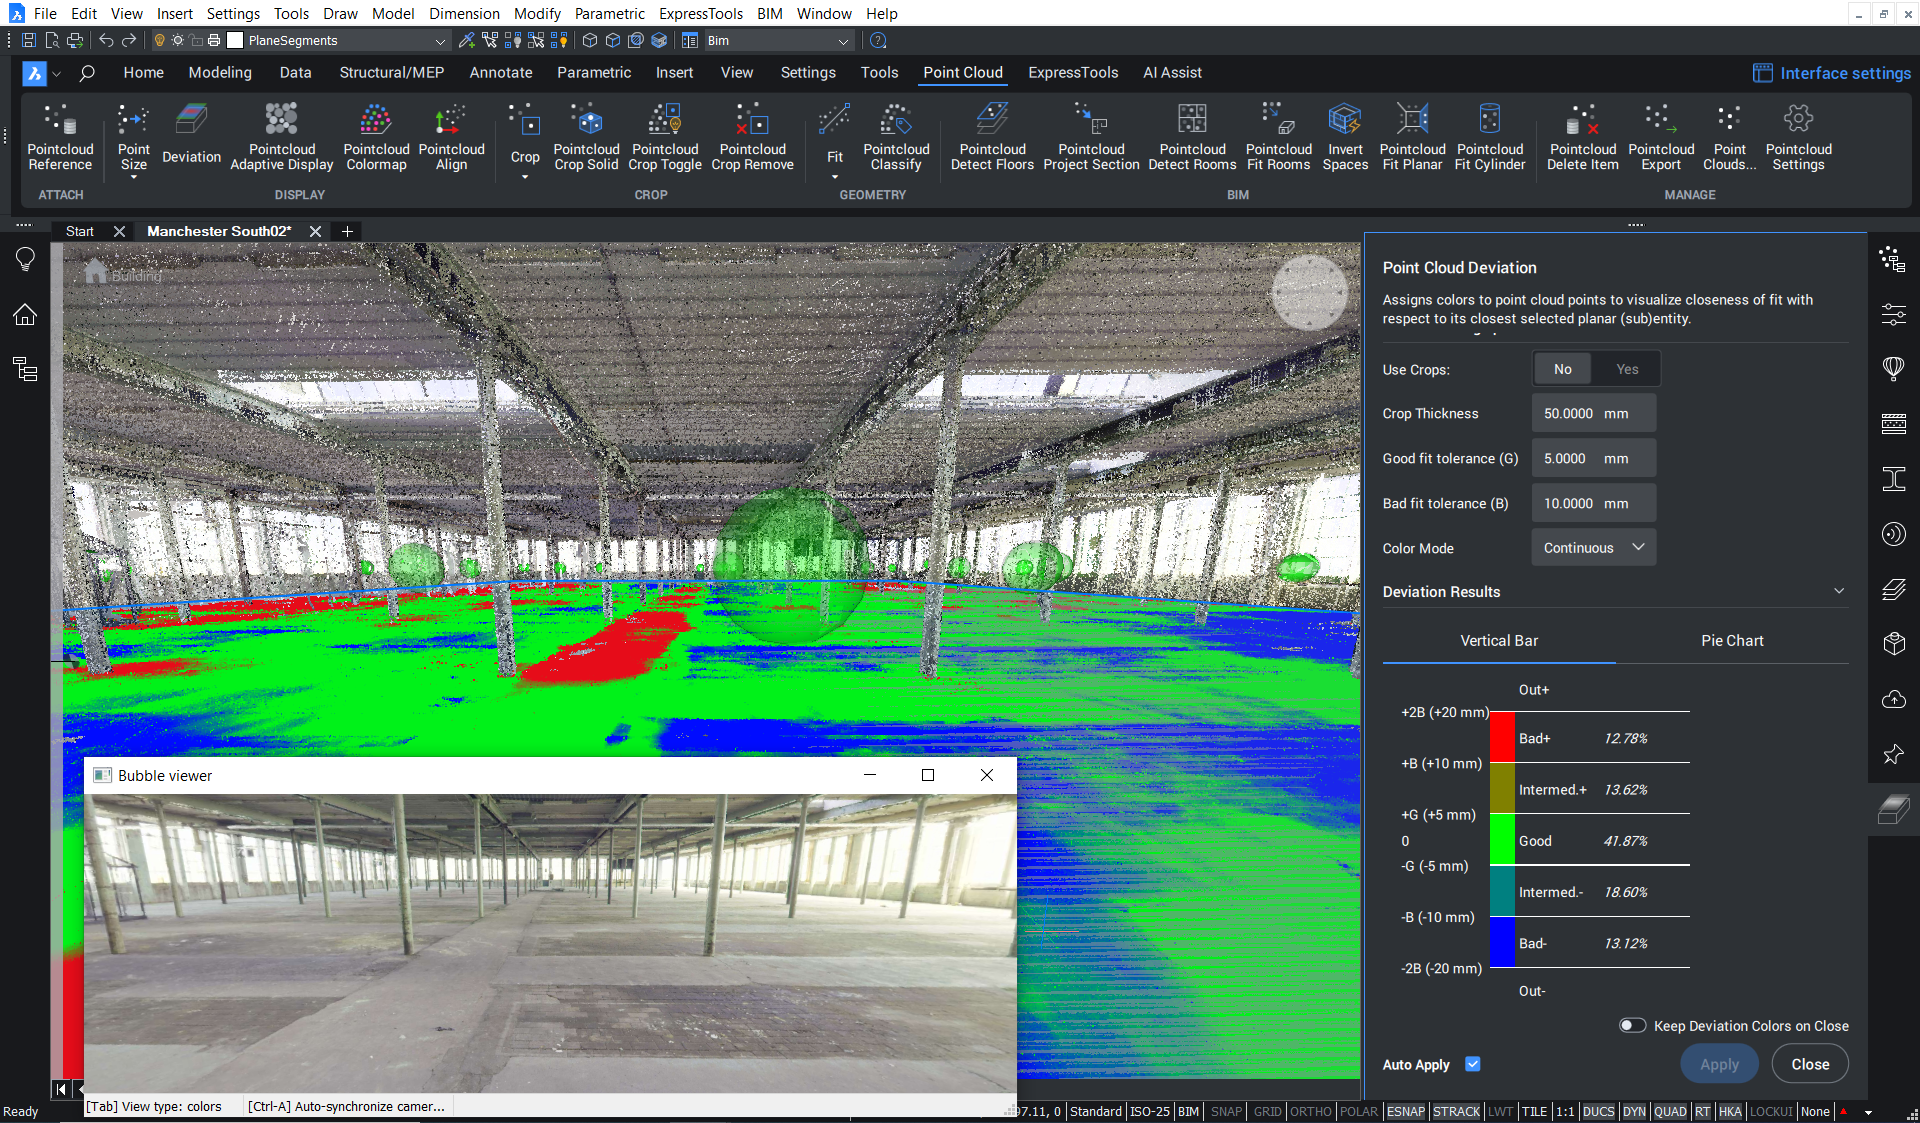 Point Cloud in BricsCAD for deviation